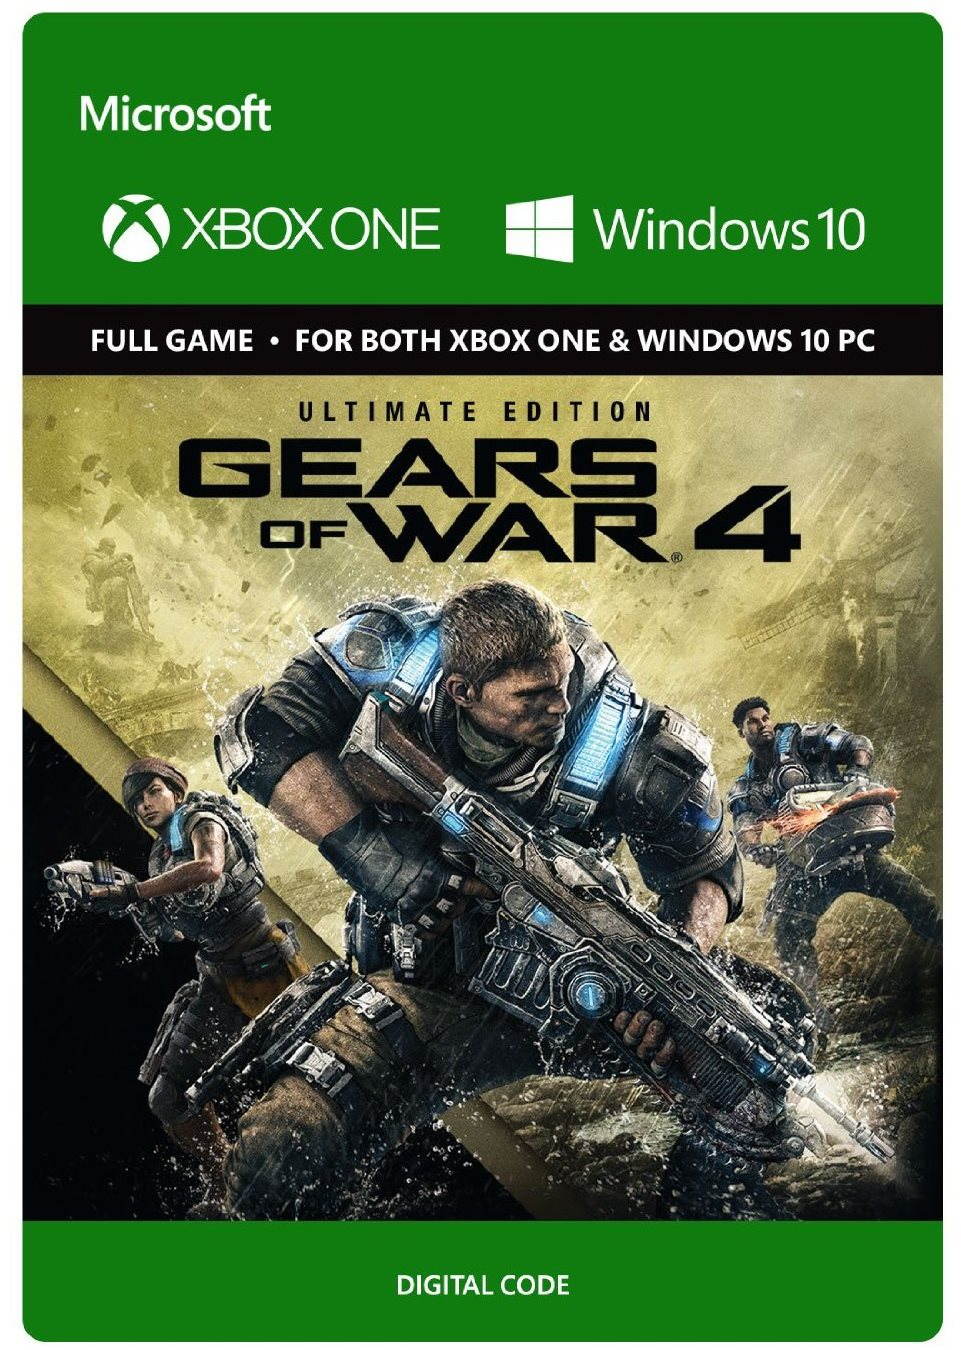 Gears of War 4 Ultimate Edition - Xbox One, PC DIGITAL